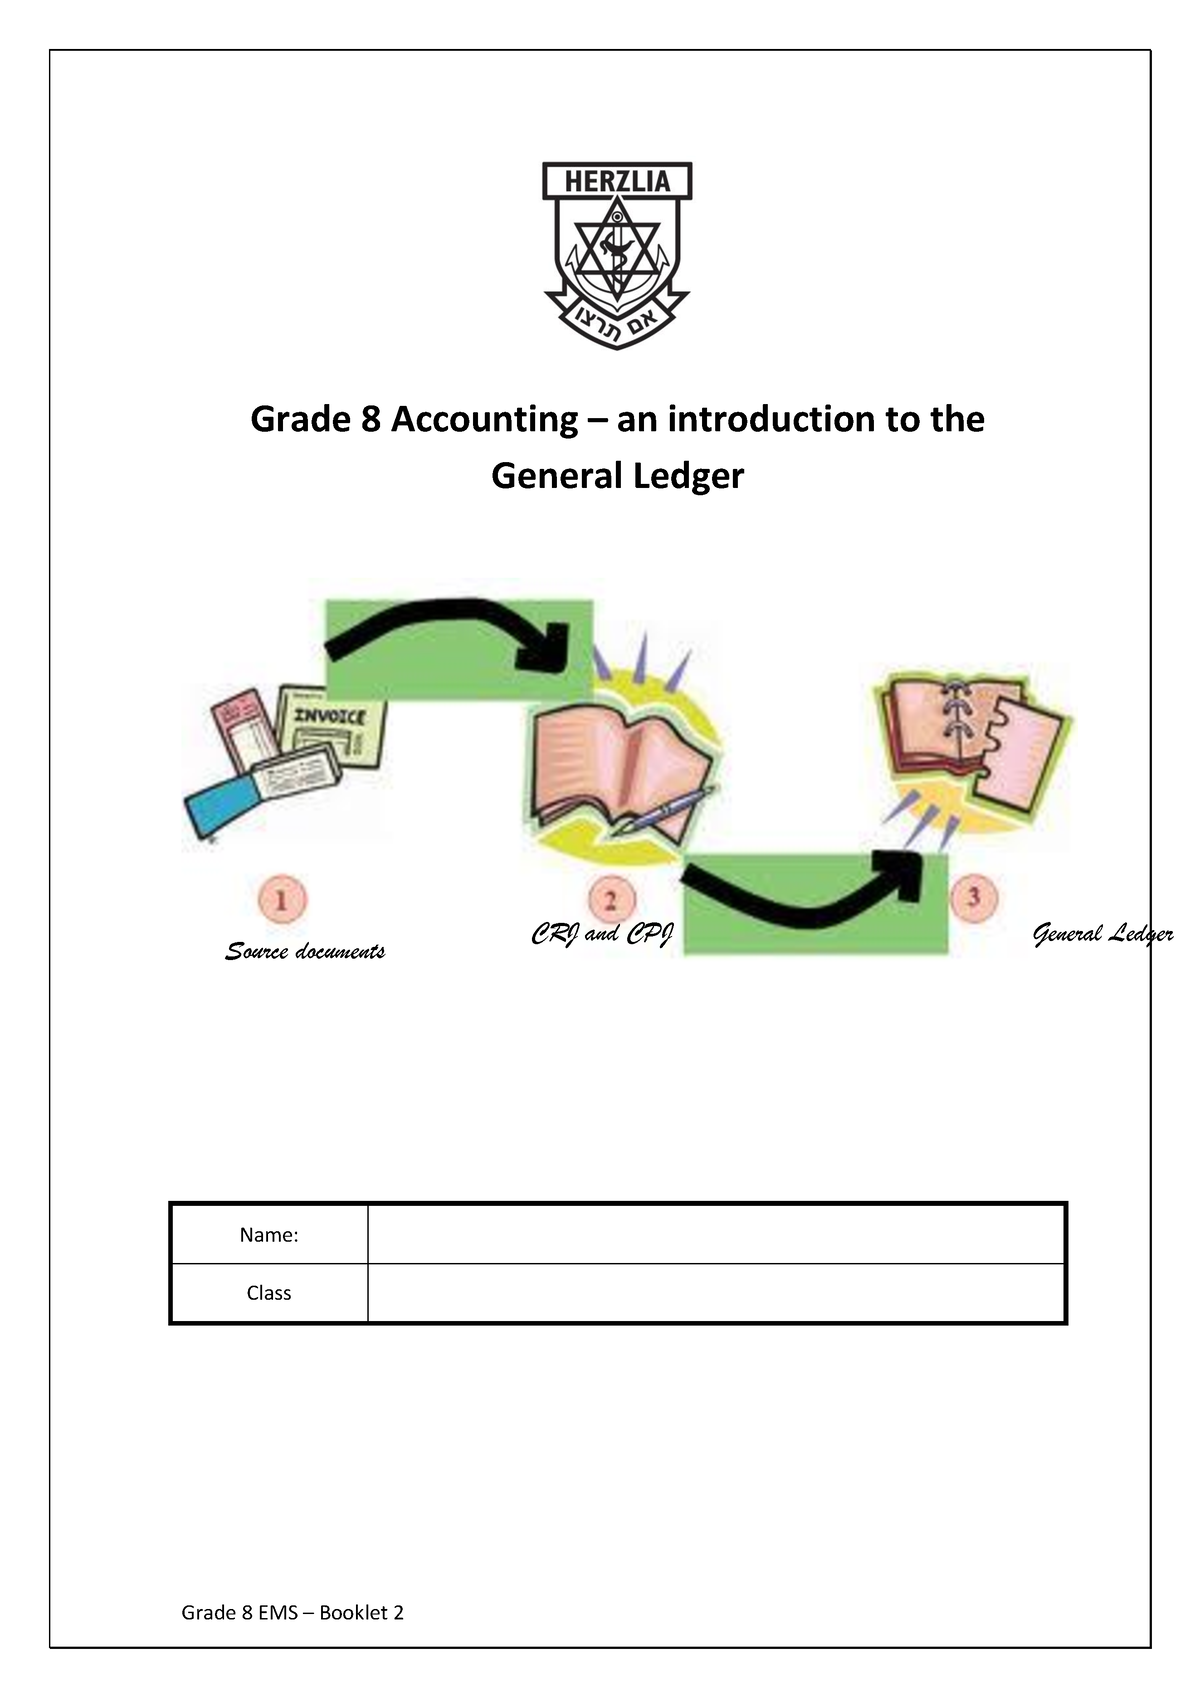 booklet-two-introduction-to-general-ledger-grade-8-ems-booklet-2